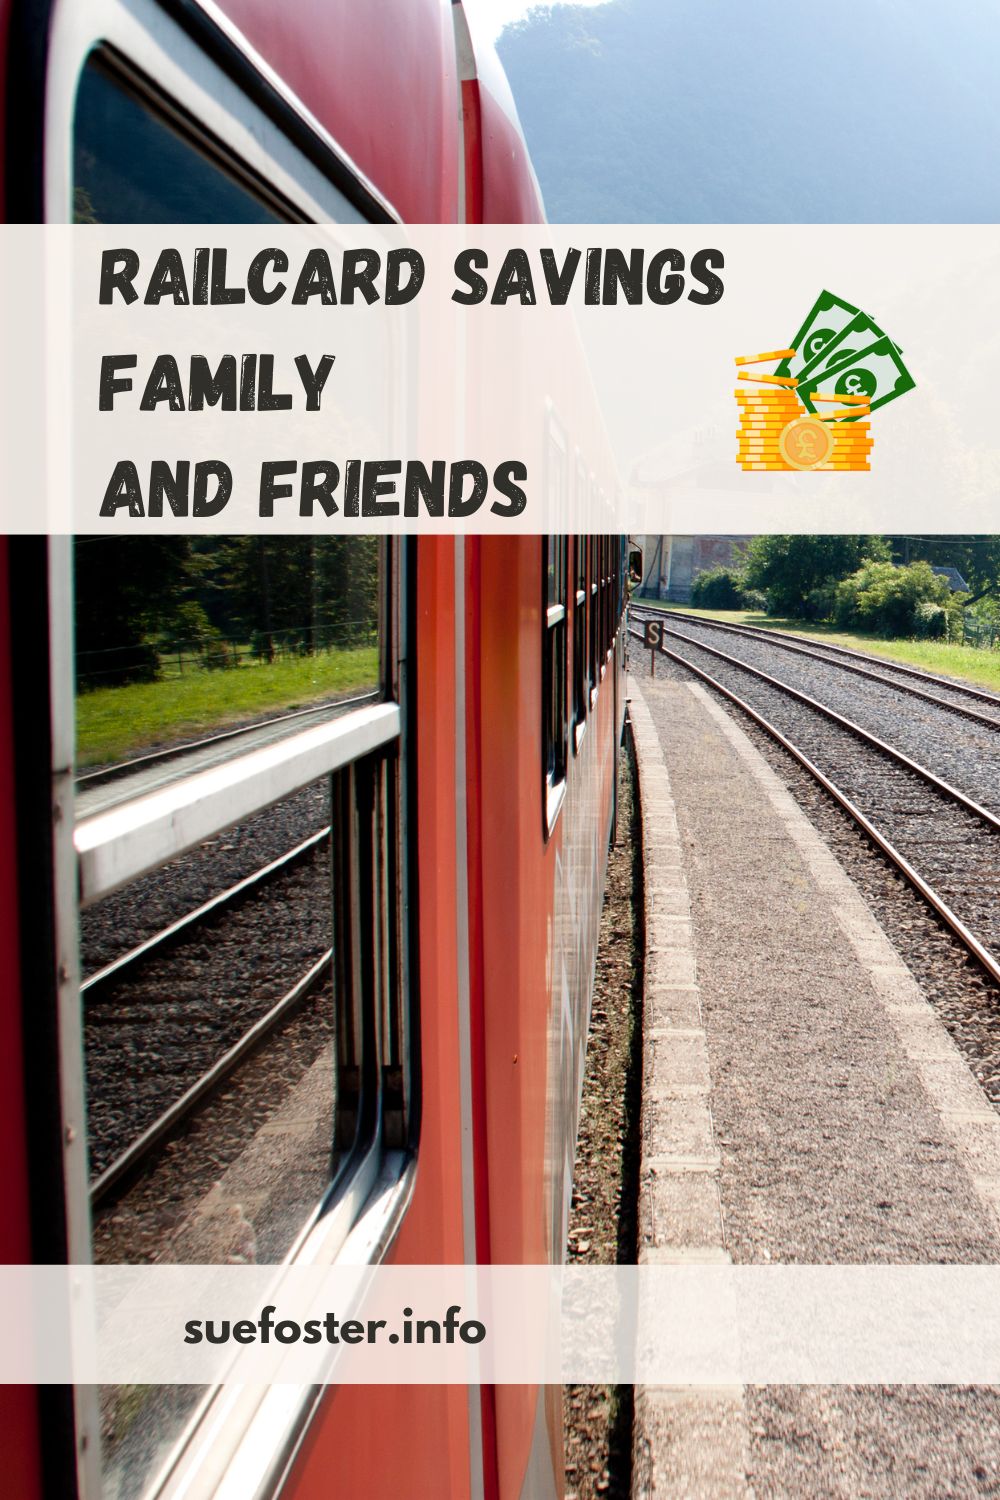 Explore railcard savings in our blog, focusing on the Family & Friends Railcard—ideal for budget-conscious families & friend groups seeking great adventures.